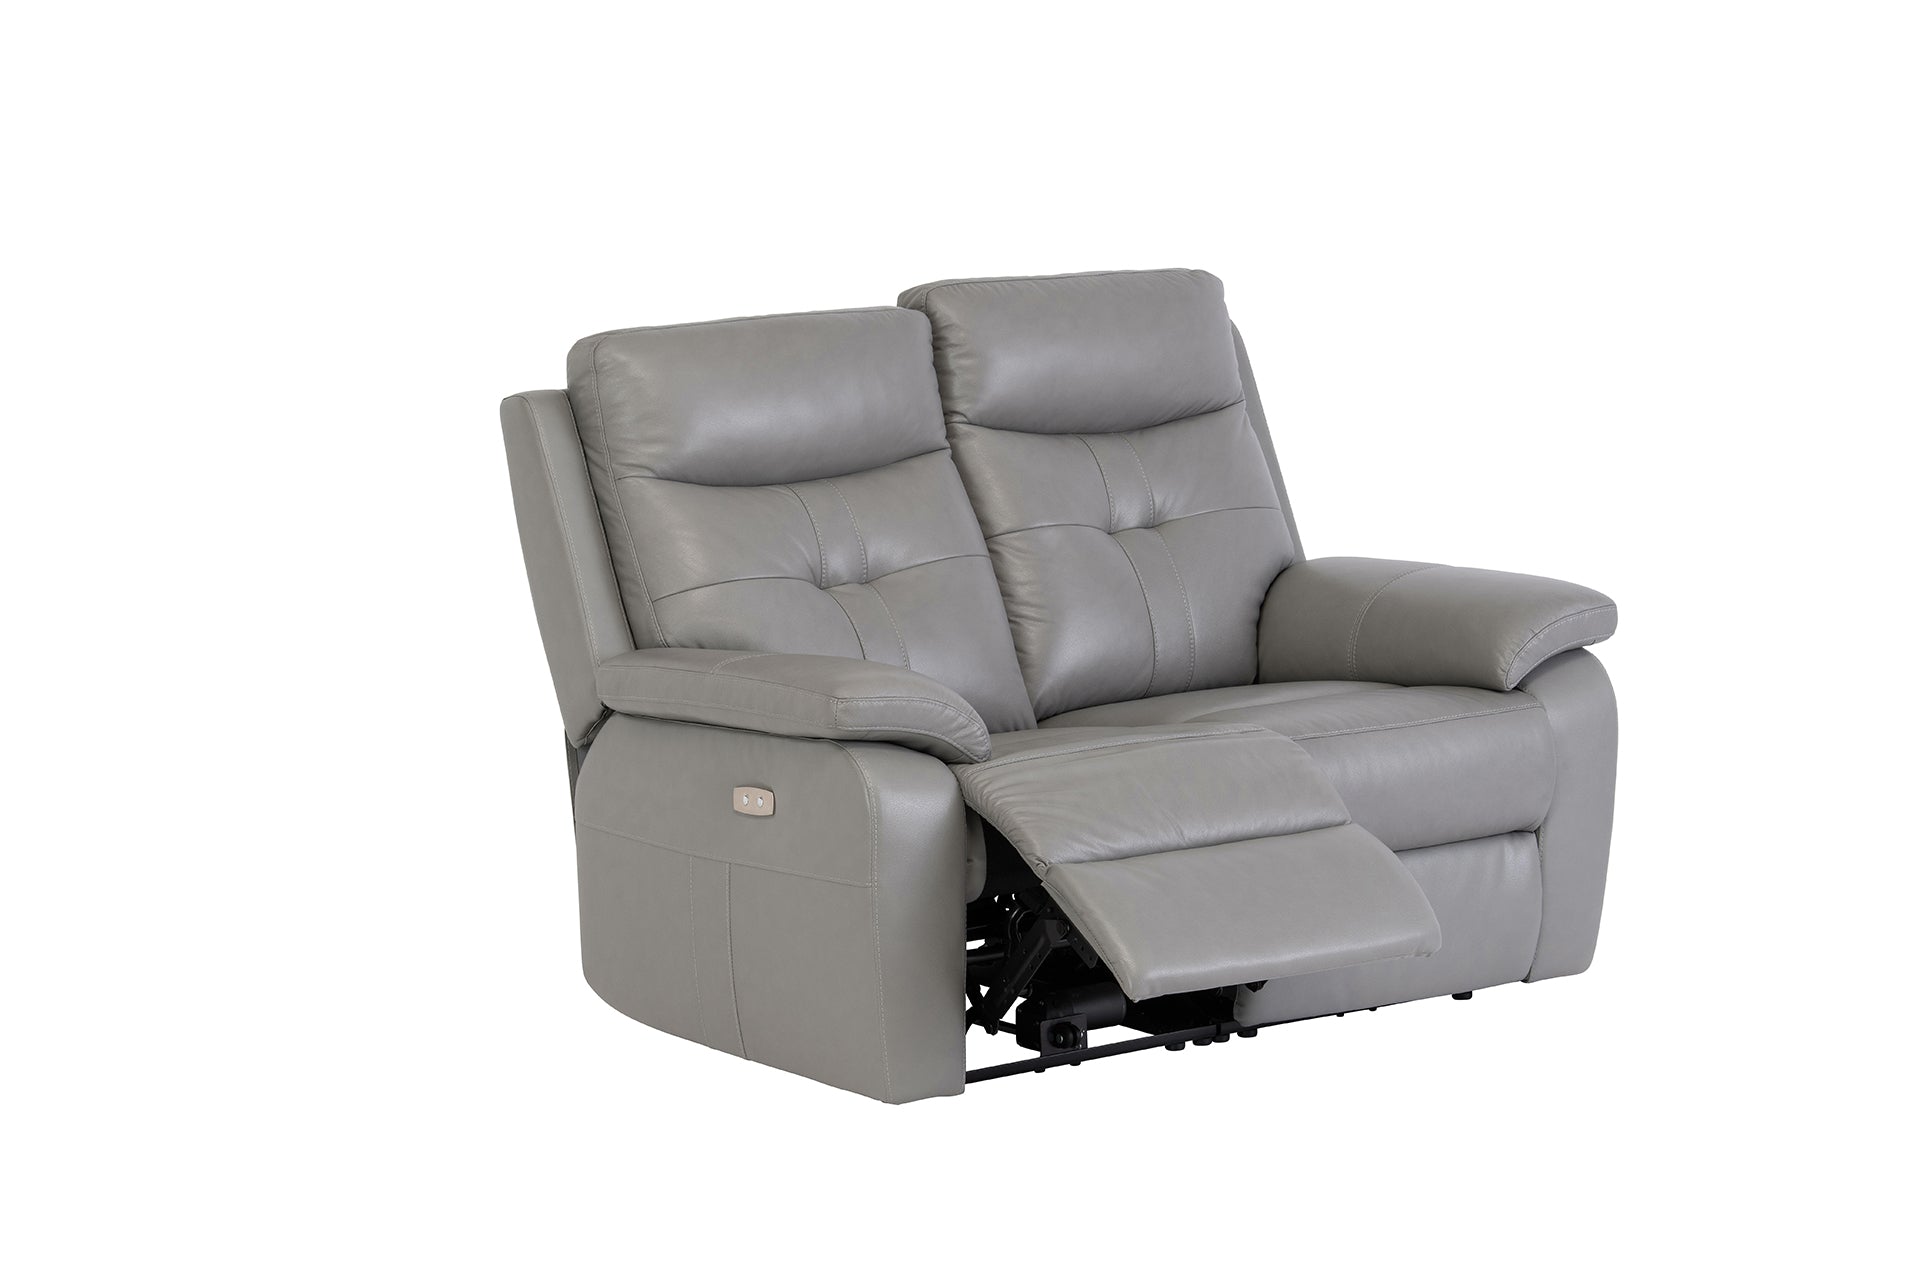 2 seater electric recliner sofa